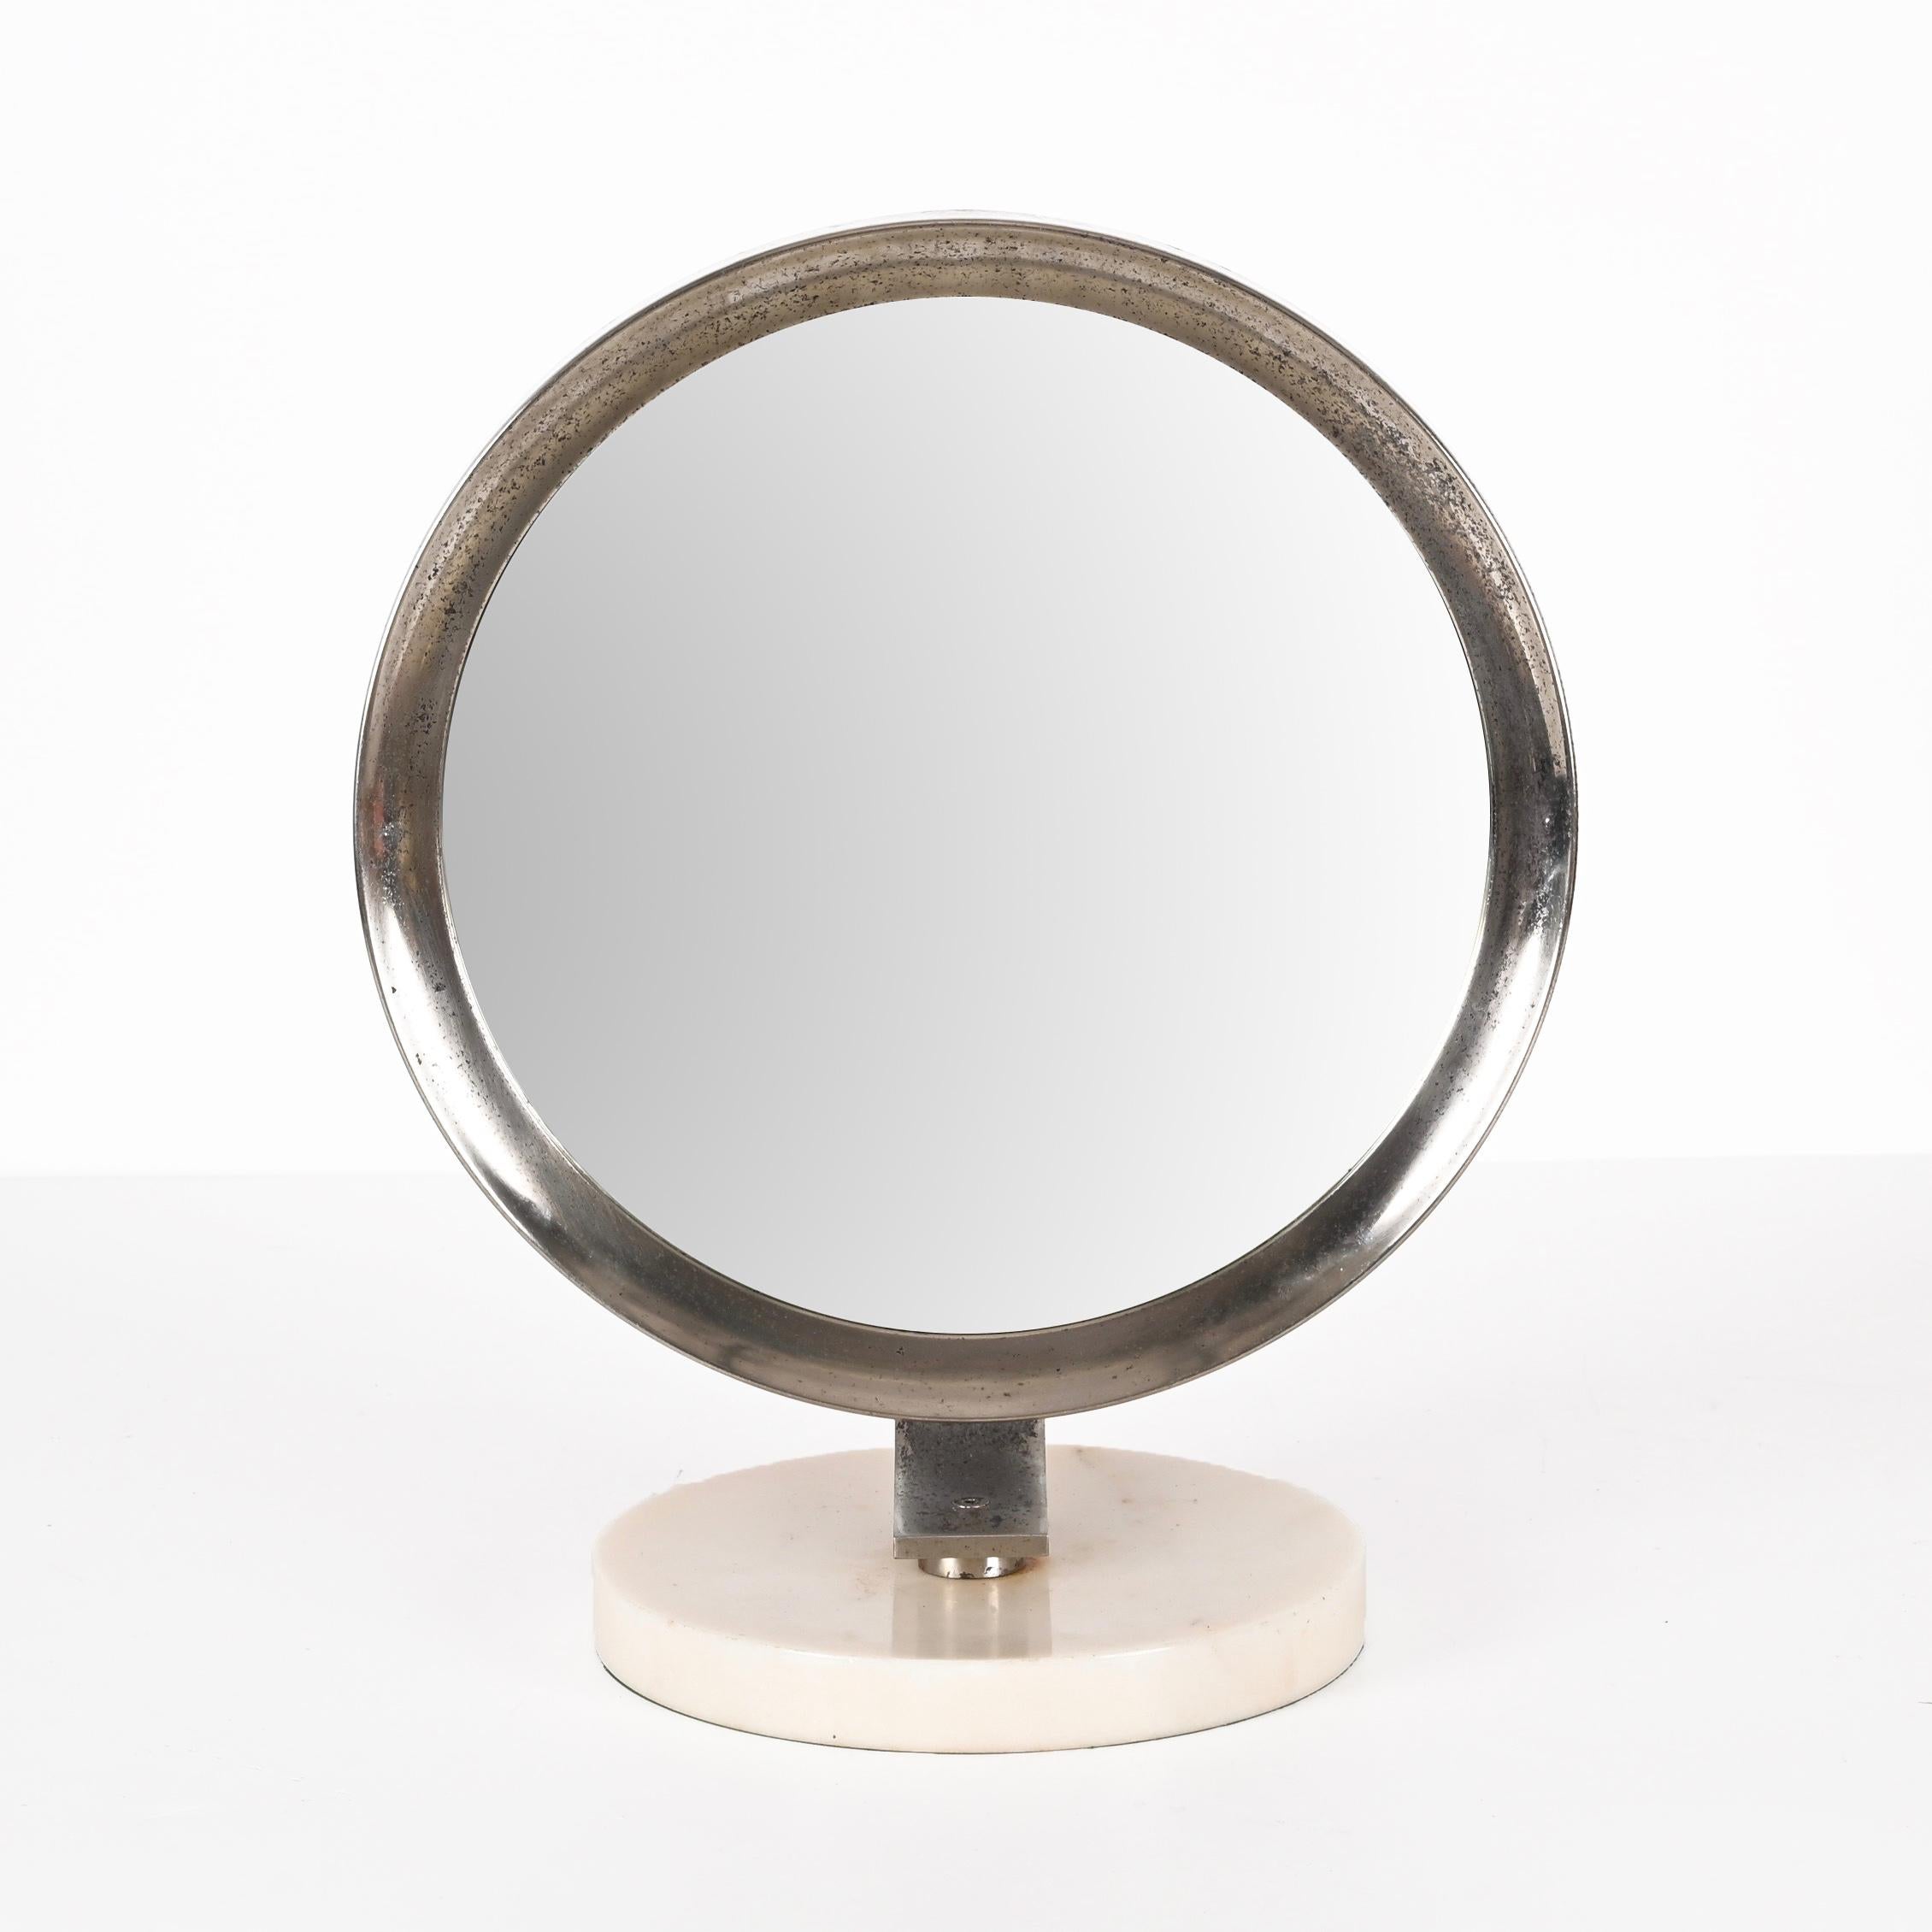 Midcentury Round White Carrara Marble and Steel Italian Dressing Mirror, 1960s For Sale 2